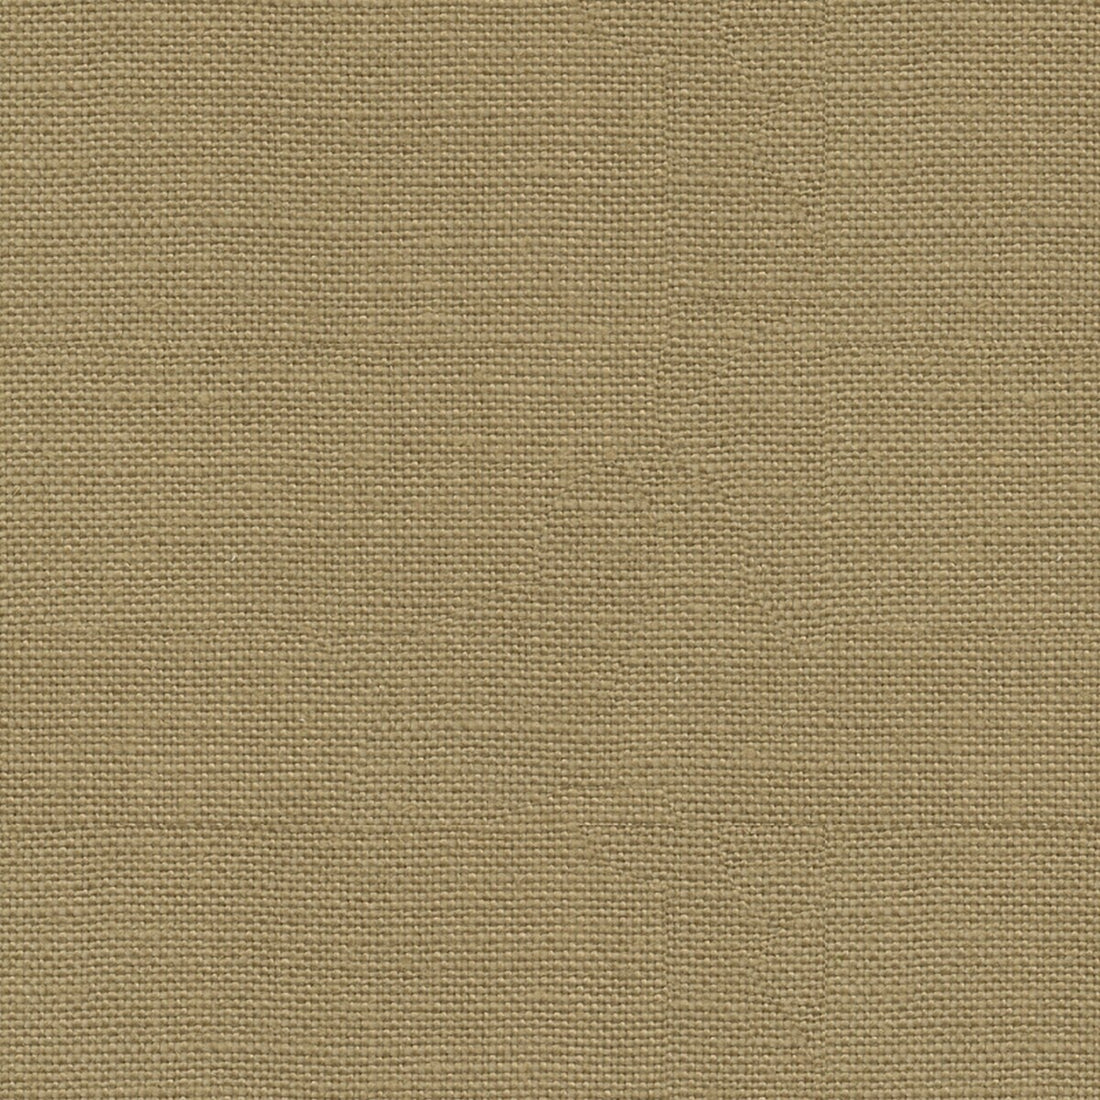 Weeken Linen fabric in antique color - pattern FD698.J52.0 - by Mulberry in the Crayford collection